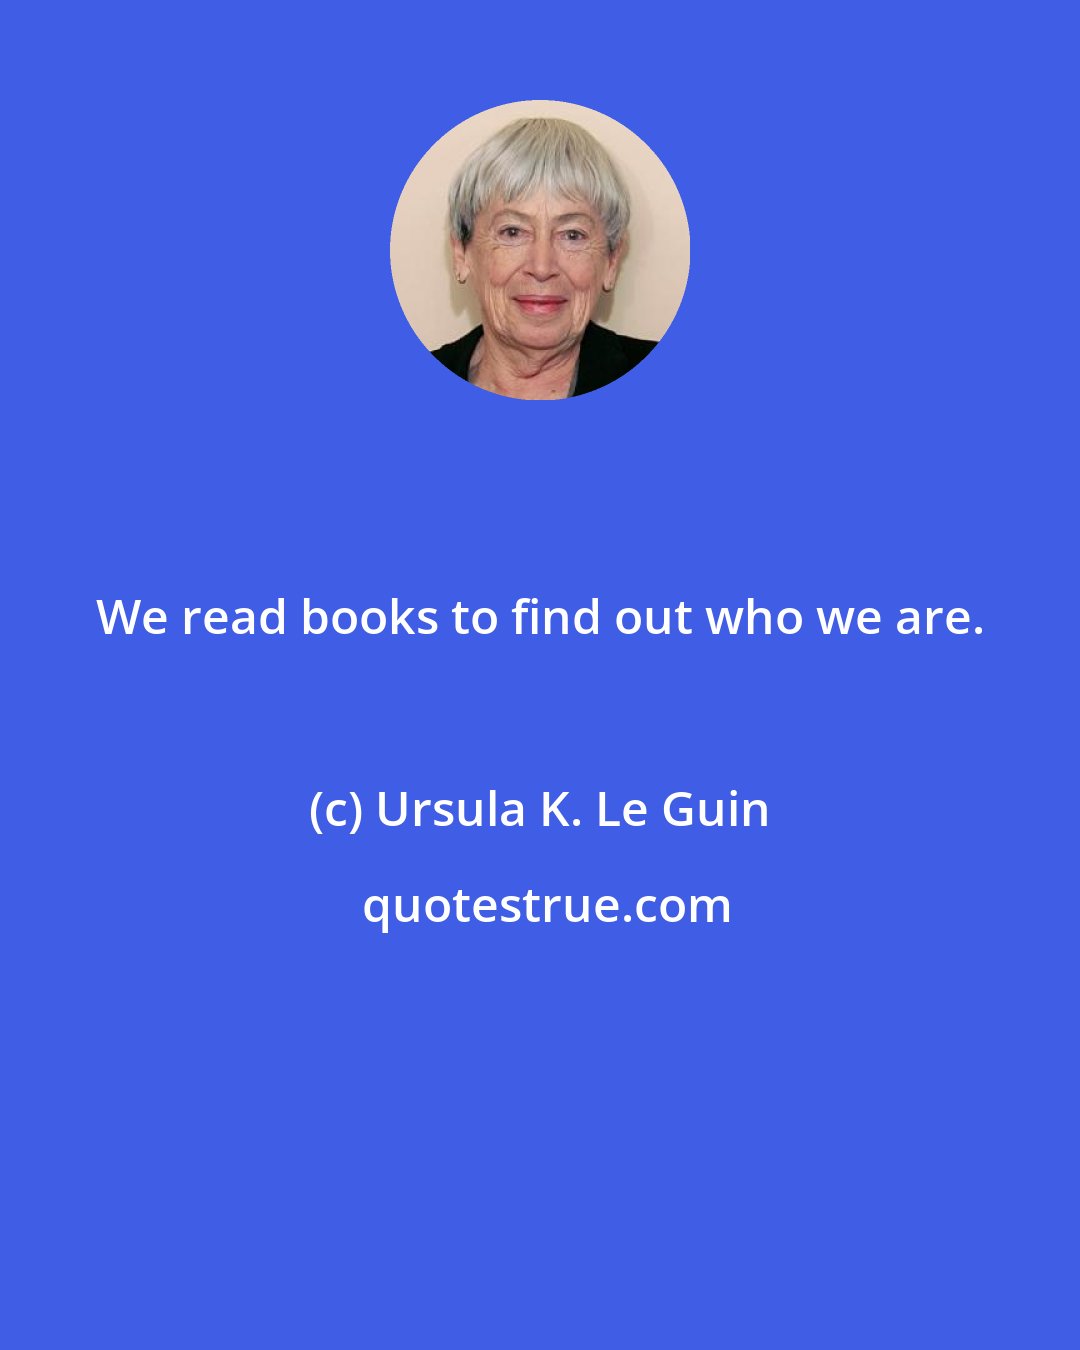 Ursula K. Le Guin: We read books to find out who we are.